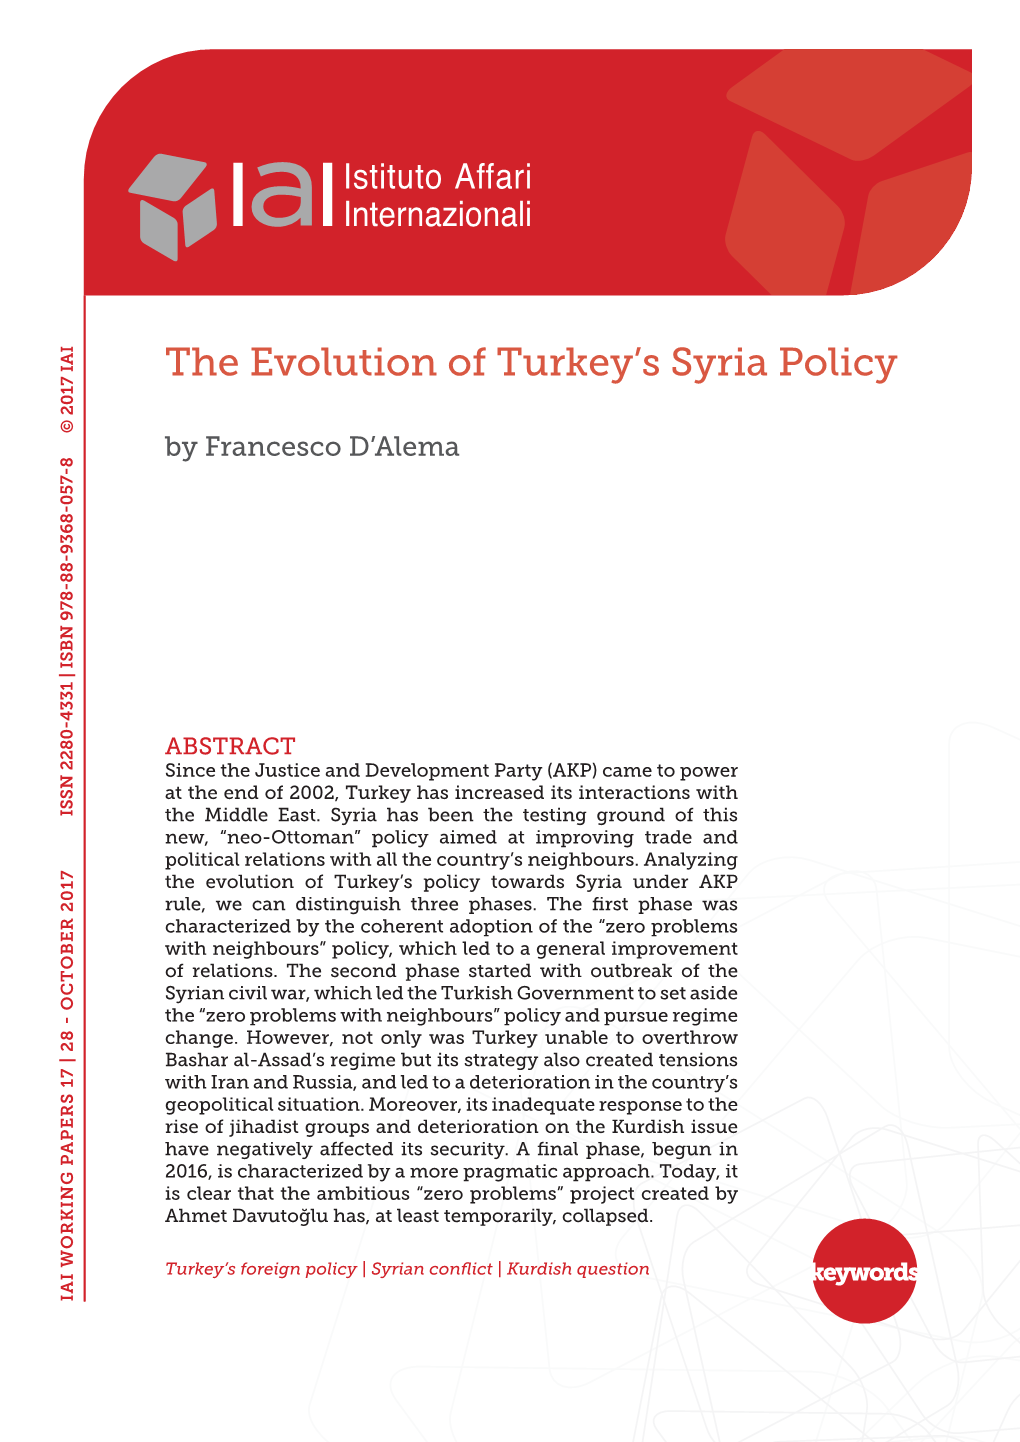 The Evolution of Turkey's Syria Policy